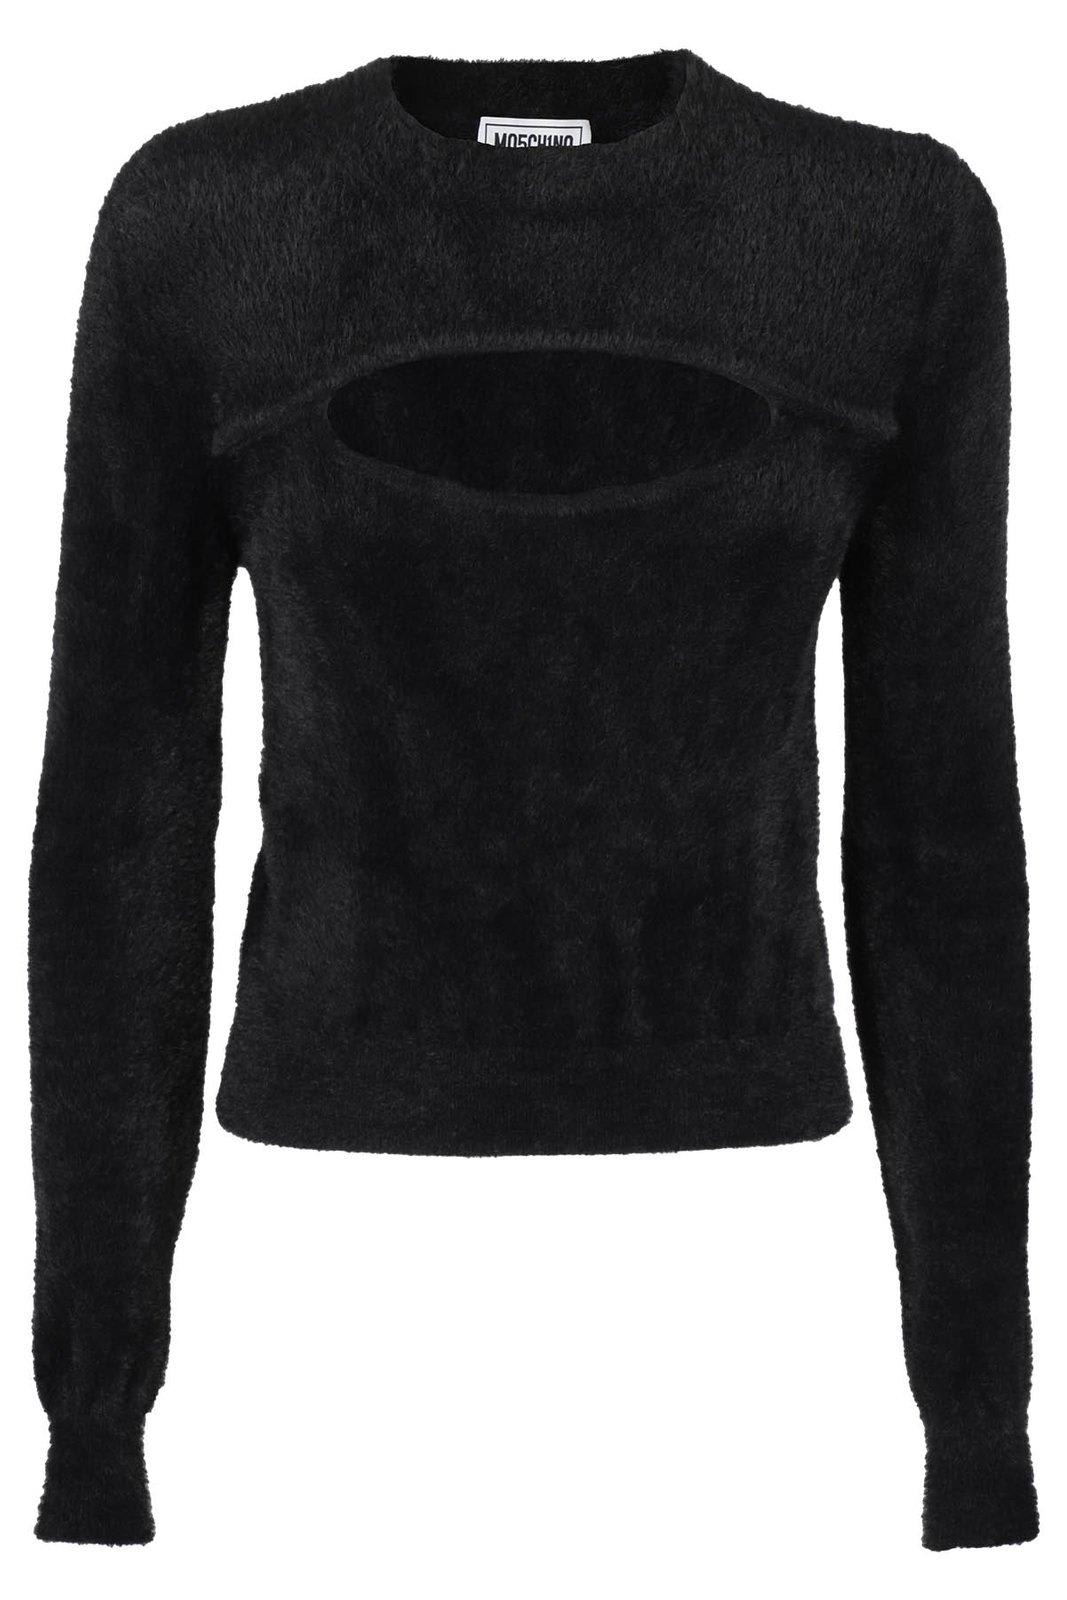 Cut Out Detailed Jumper